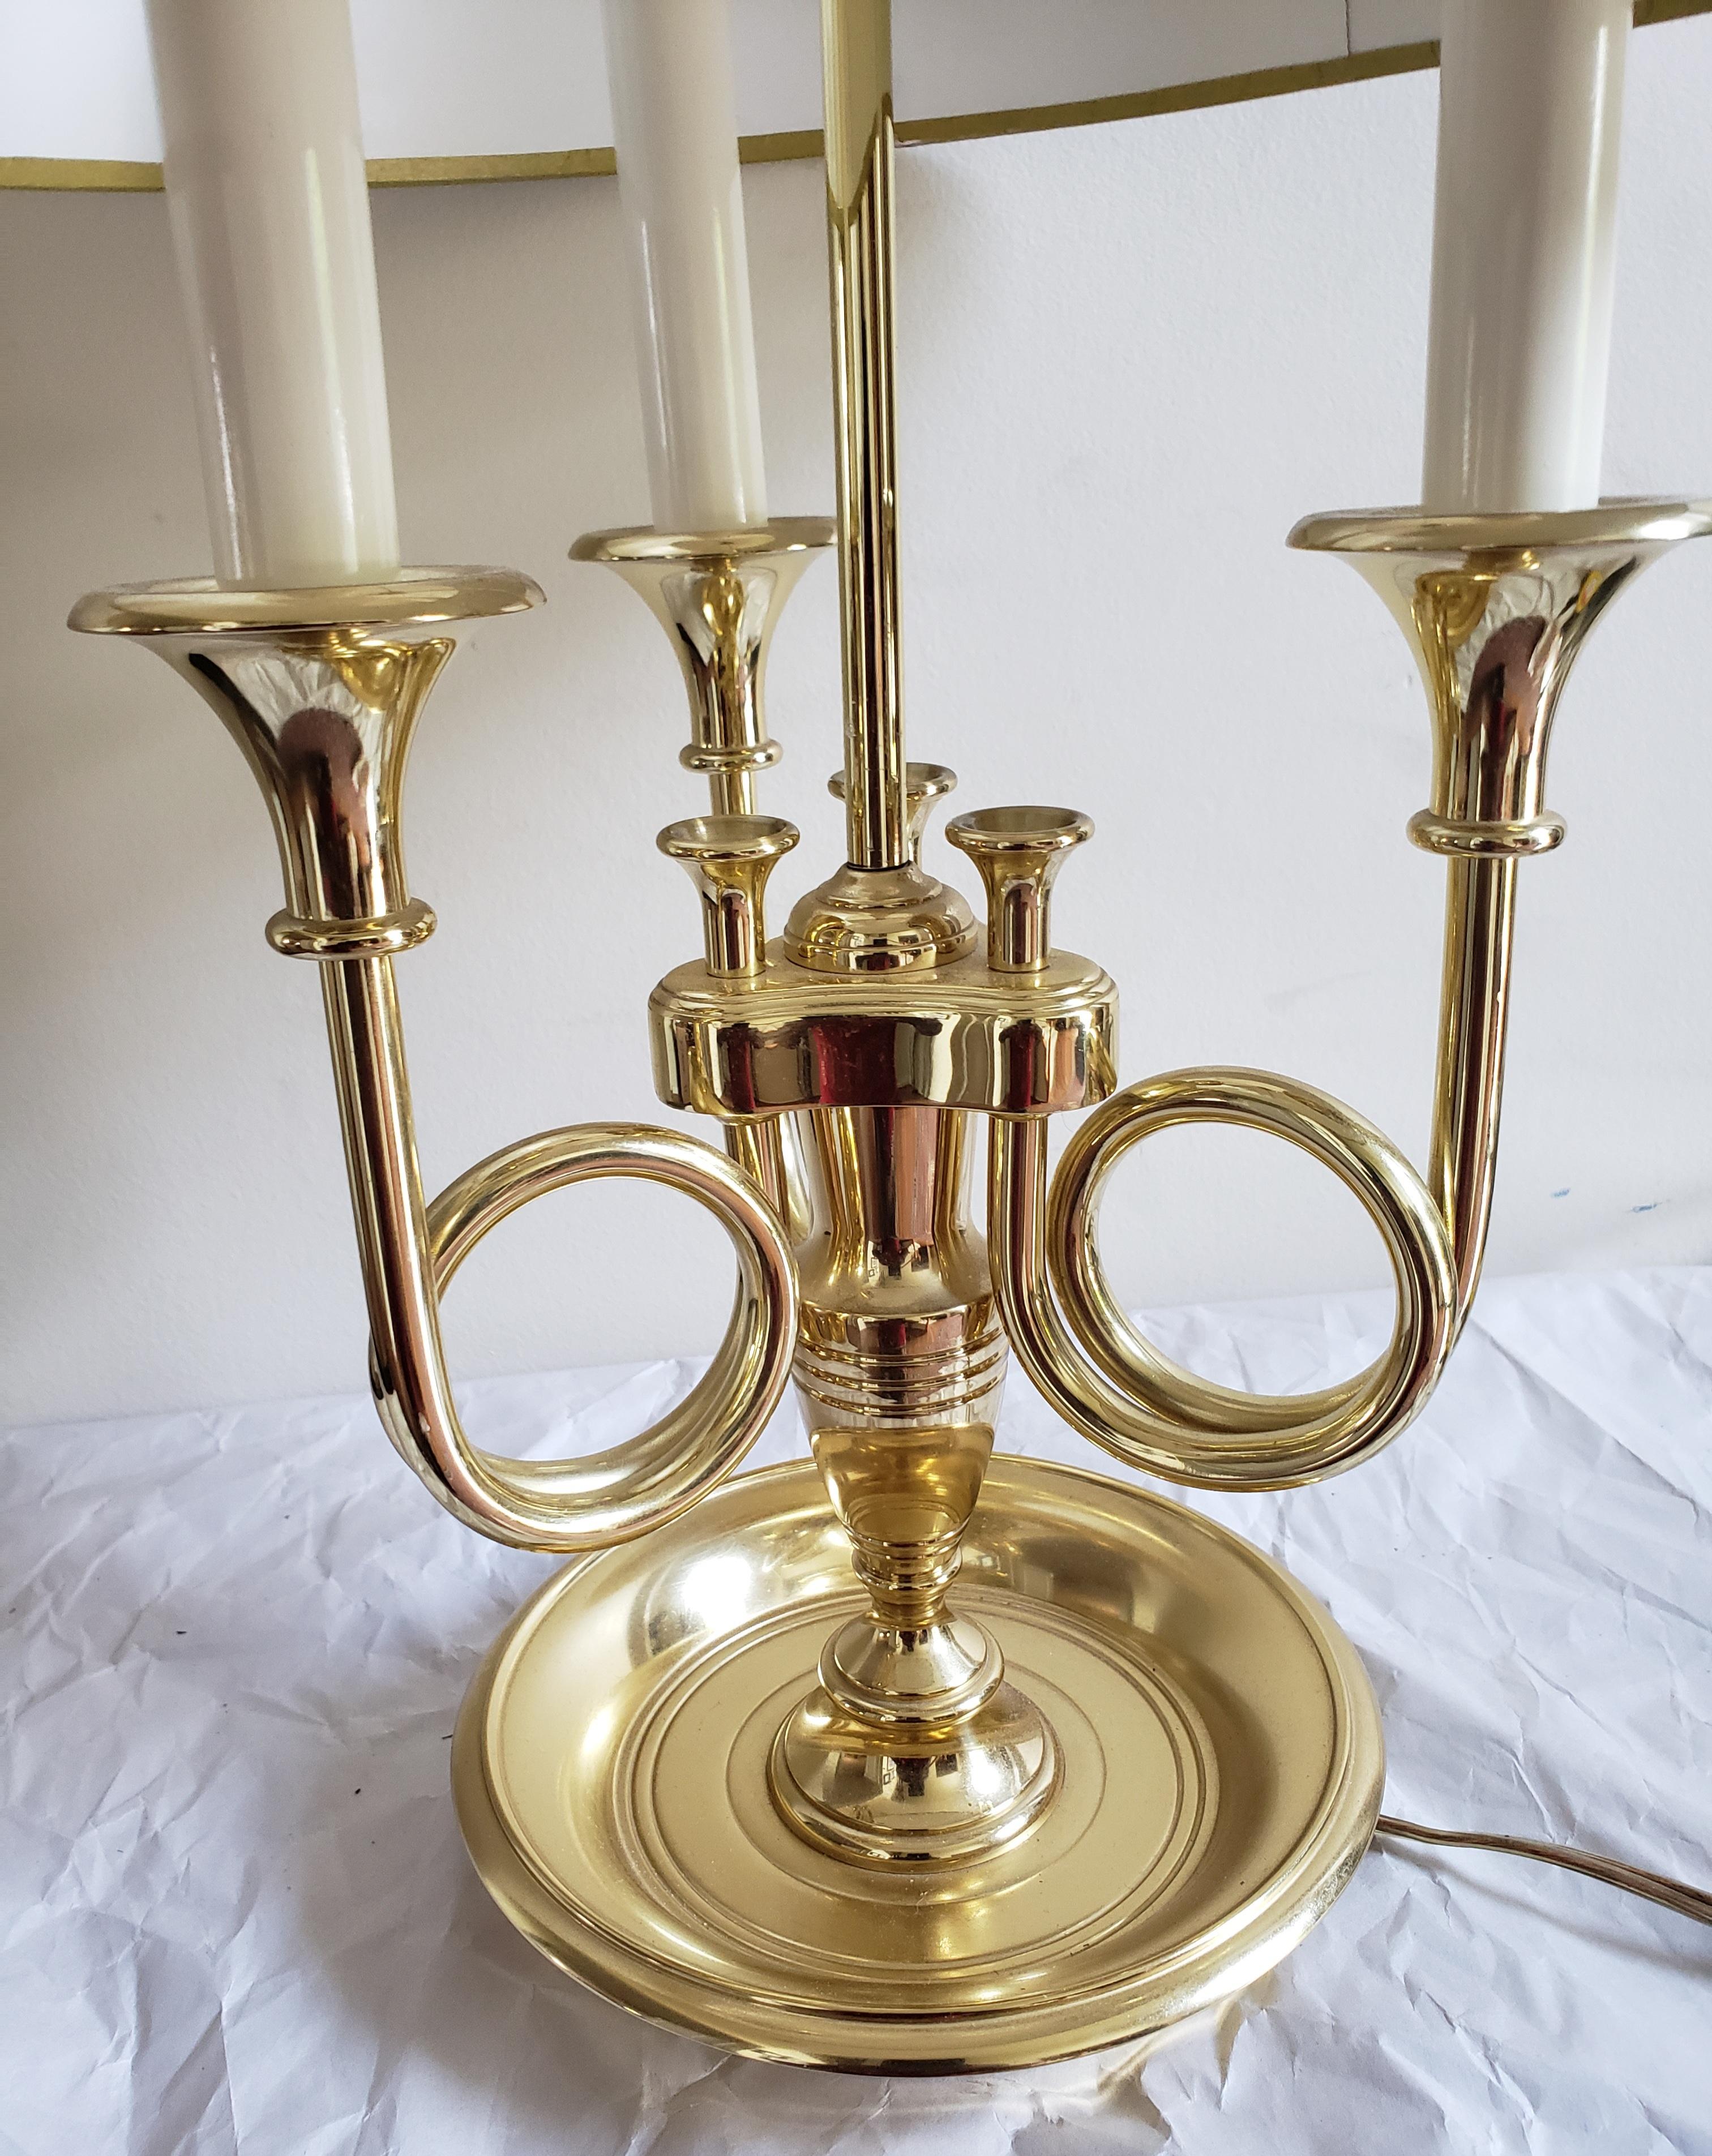  Late 20th Century French Bouillote 3-Arm Polished cast Brass Table Lamp  in very good vintage condition.
Measure 8